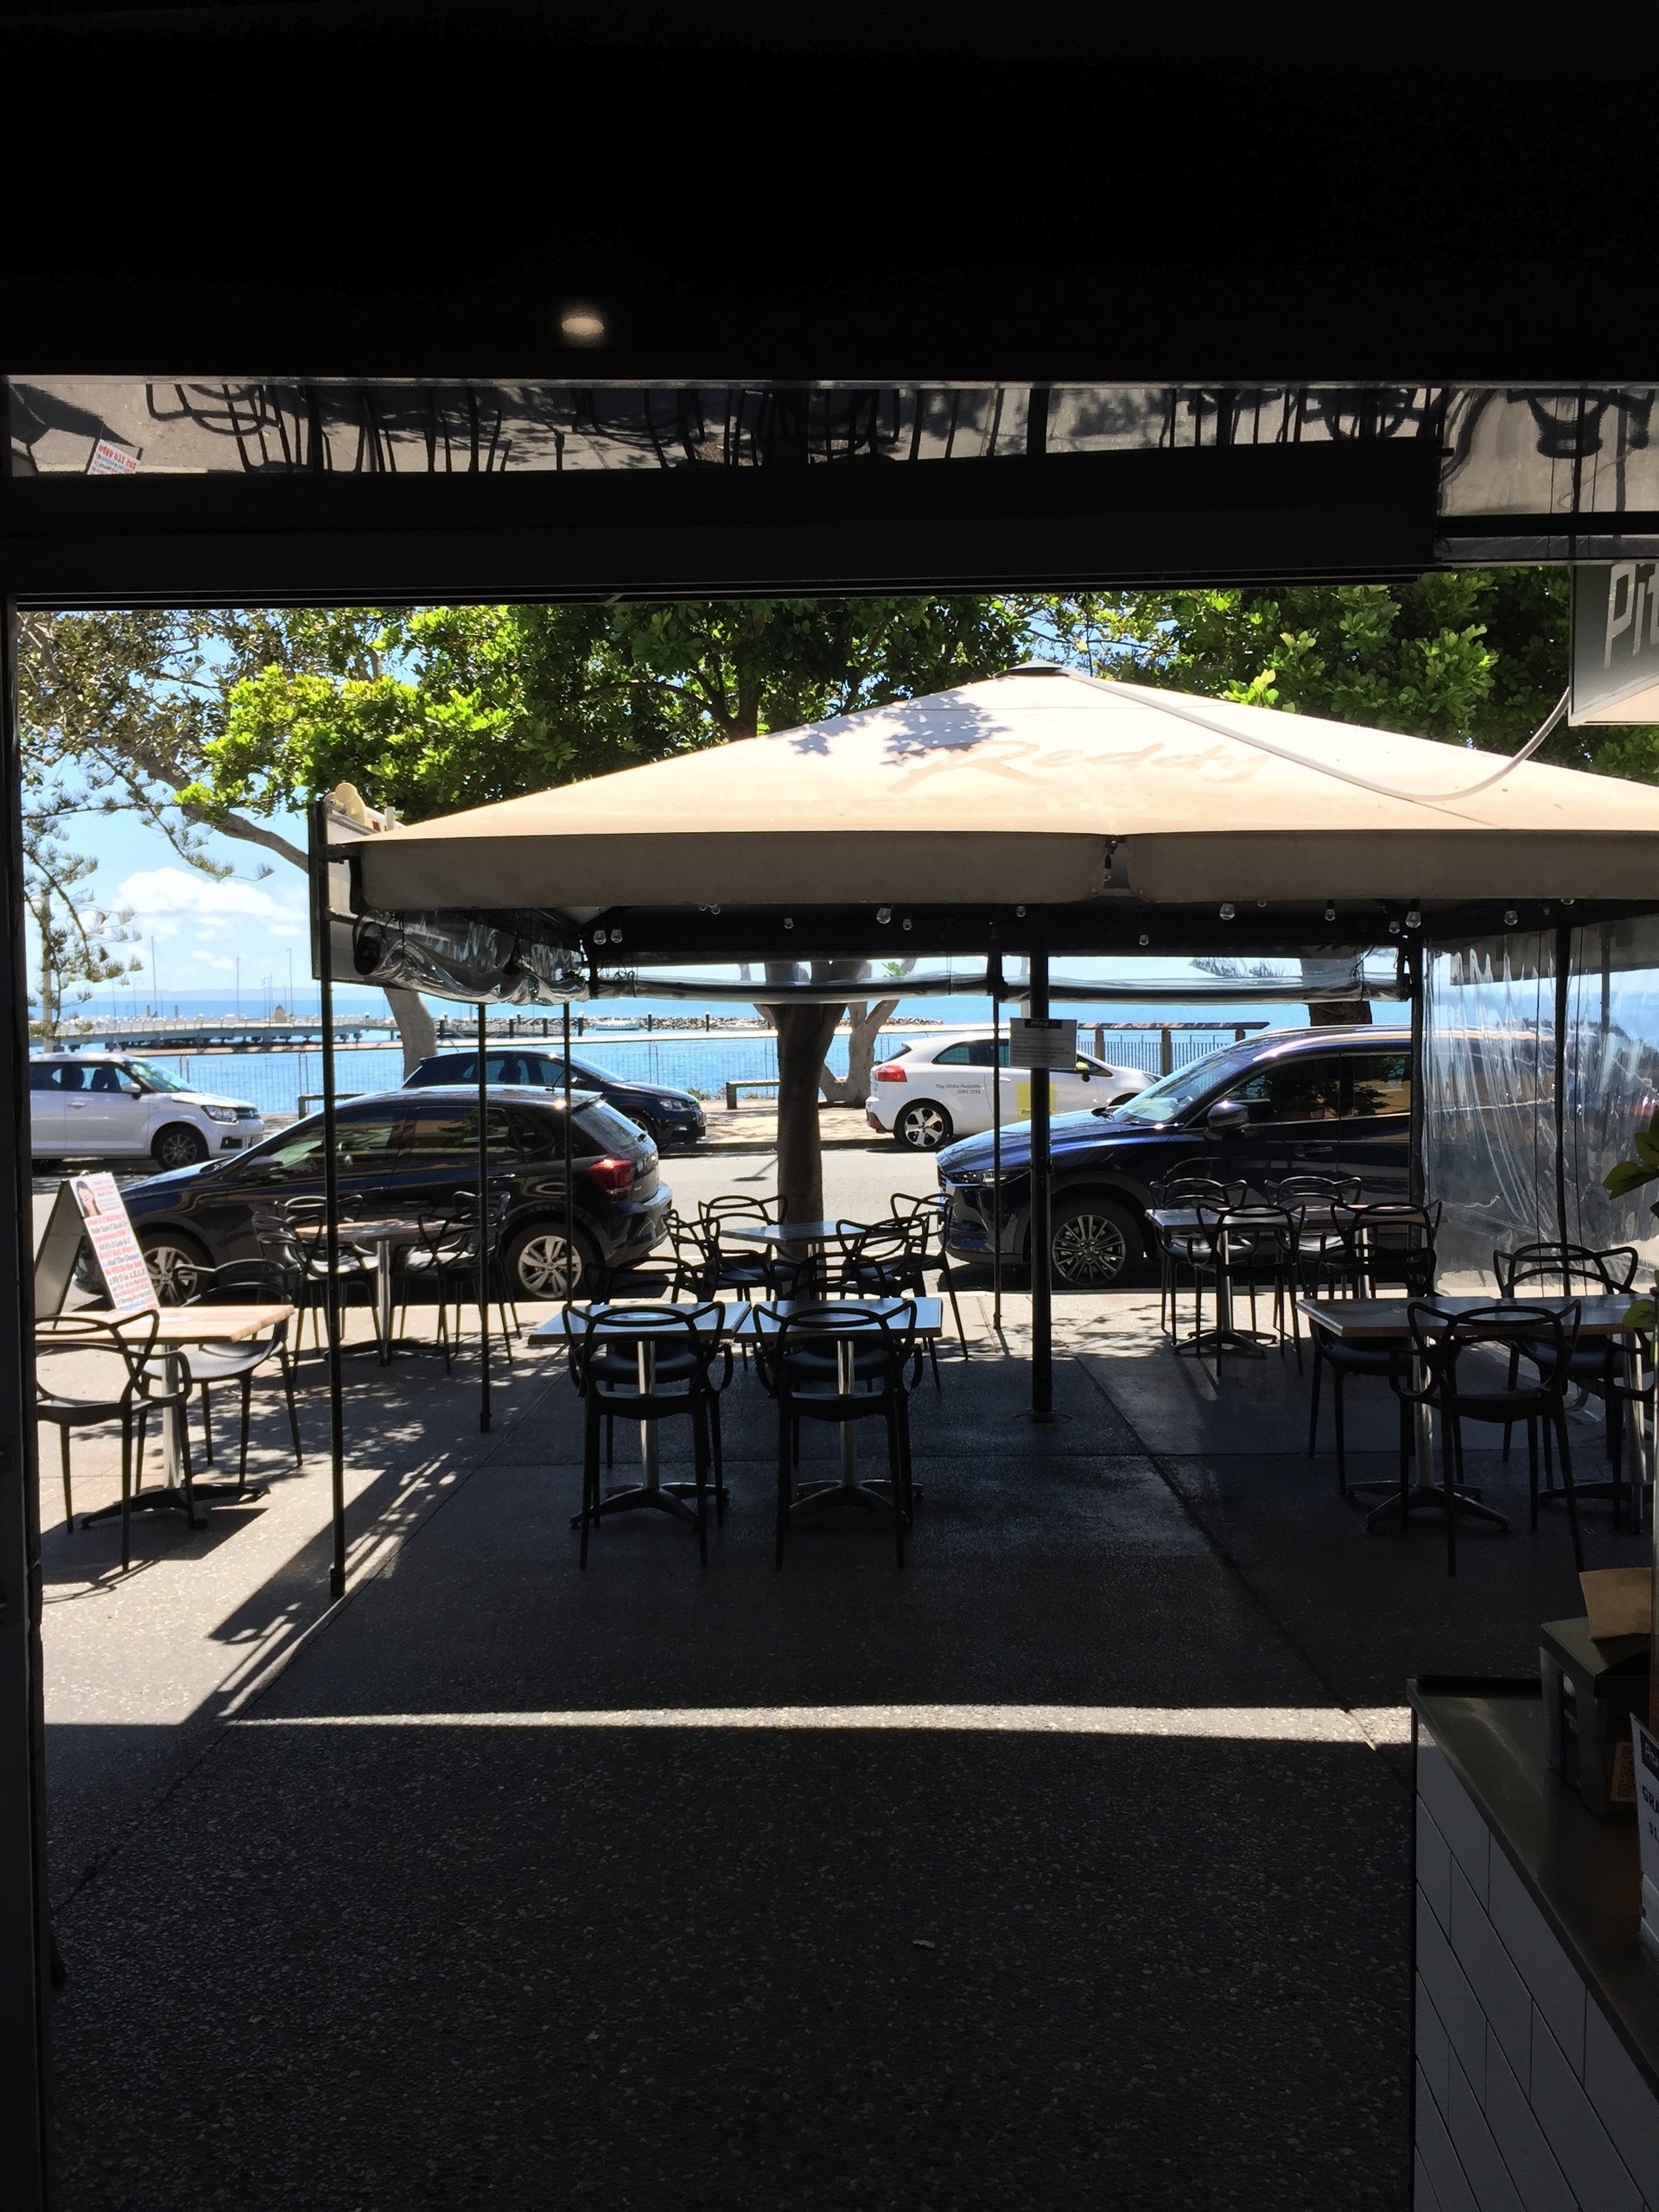 Takeaway and Café Overlooking Moreton Bay – Redcliffe